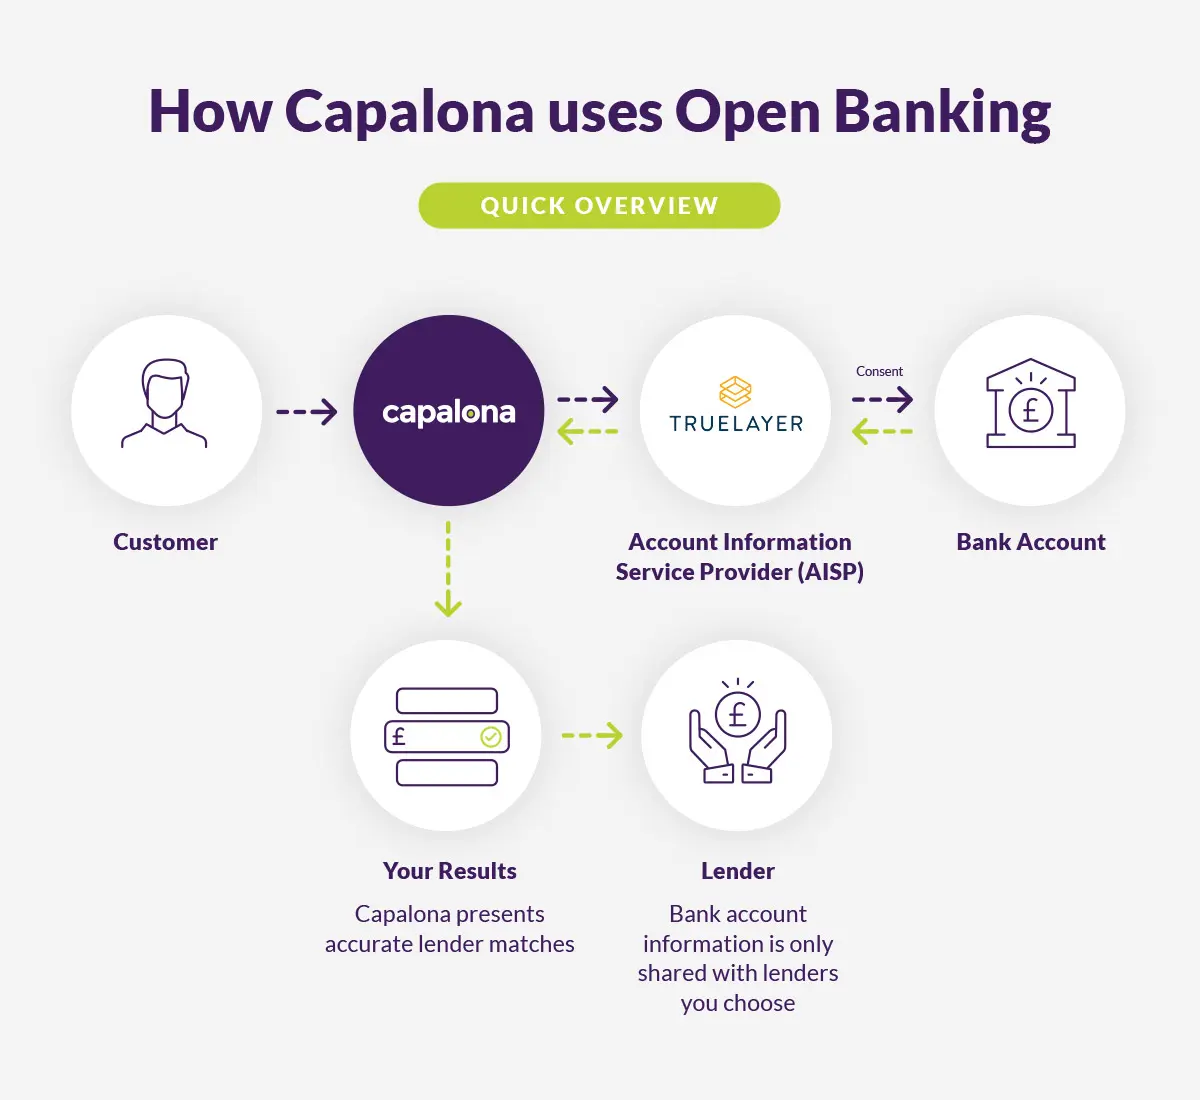 How we use open banking at Capalona